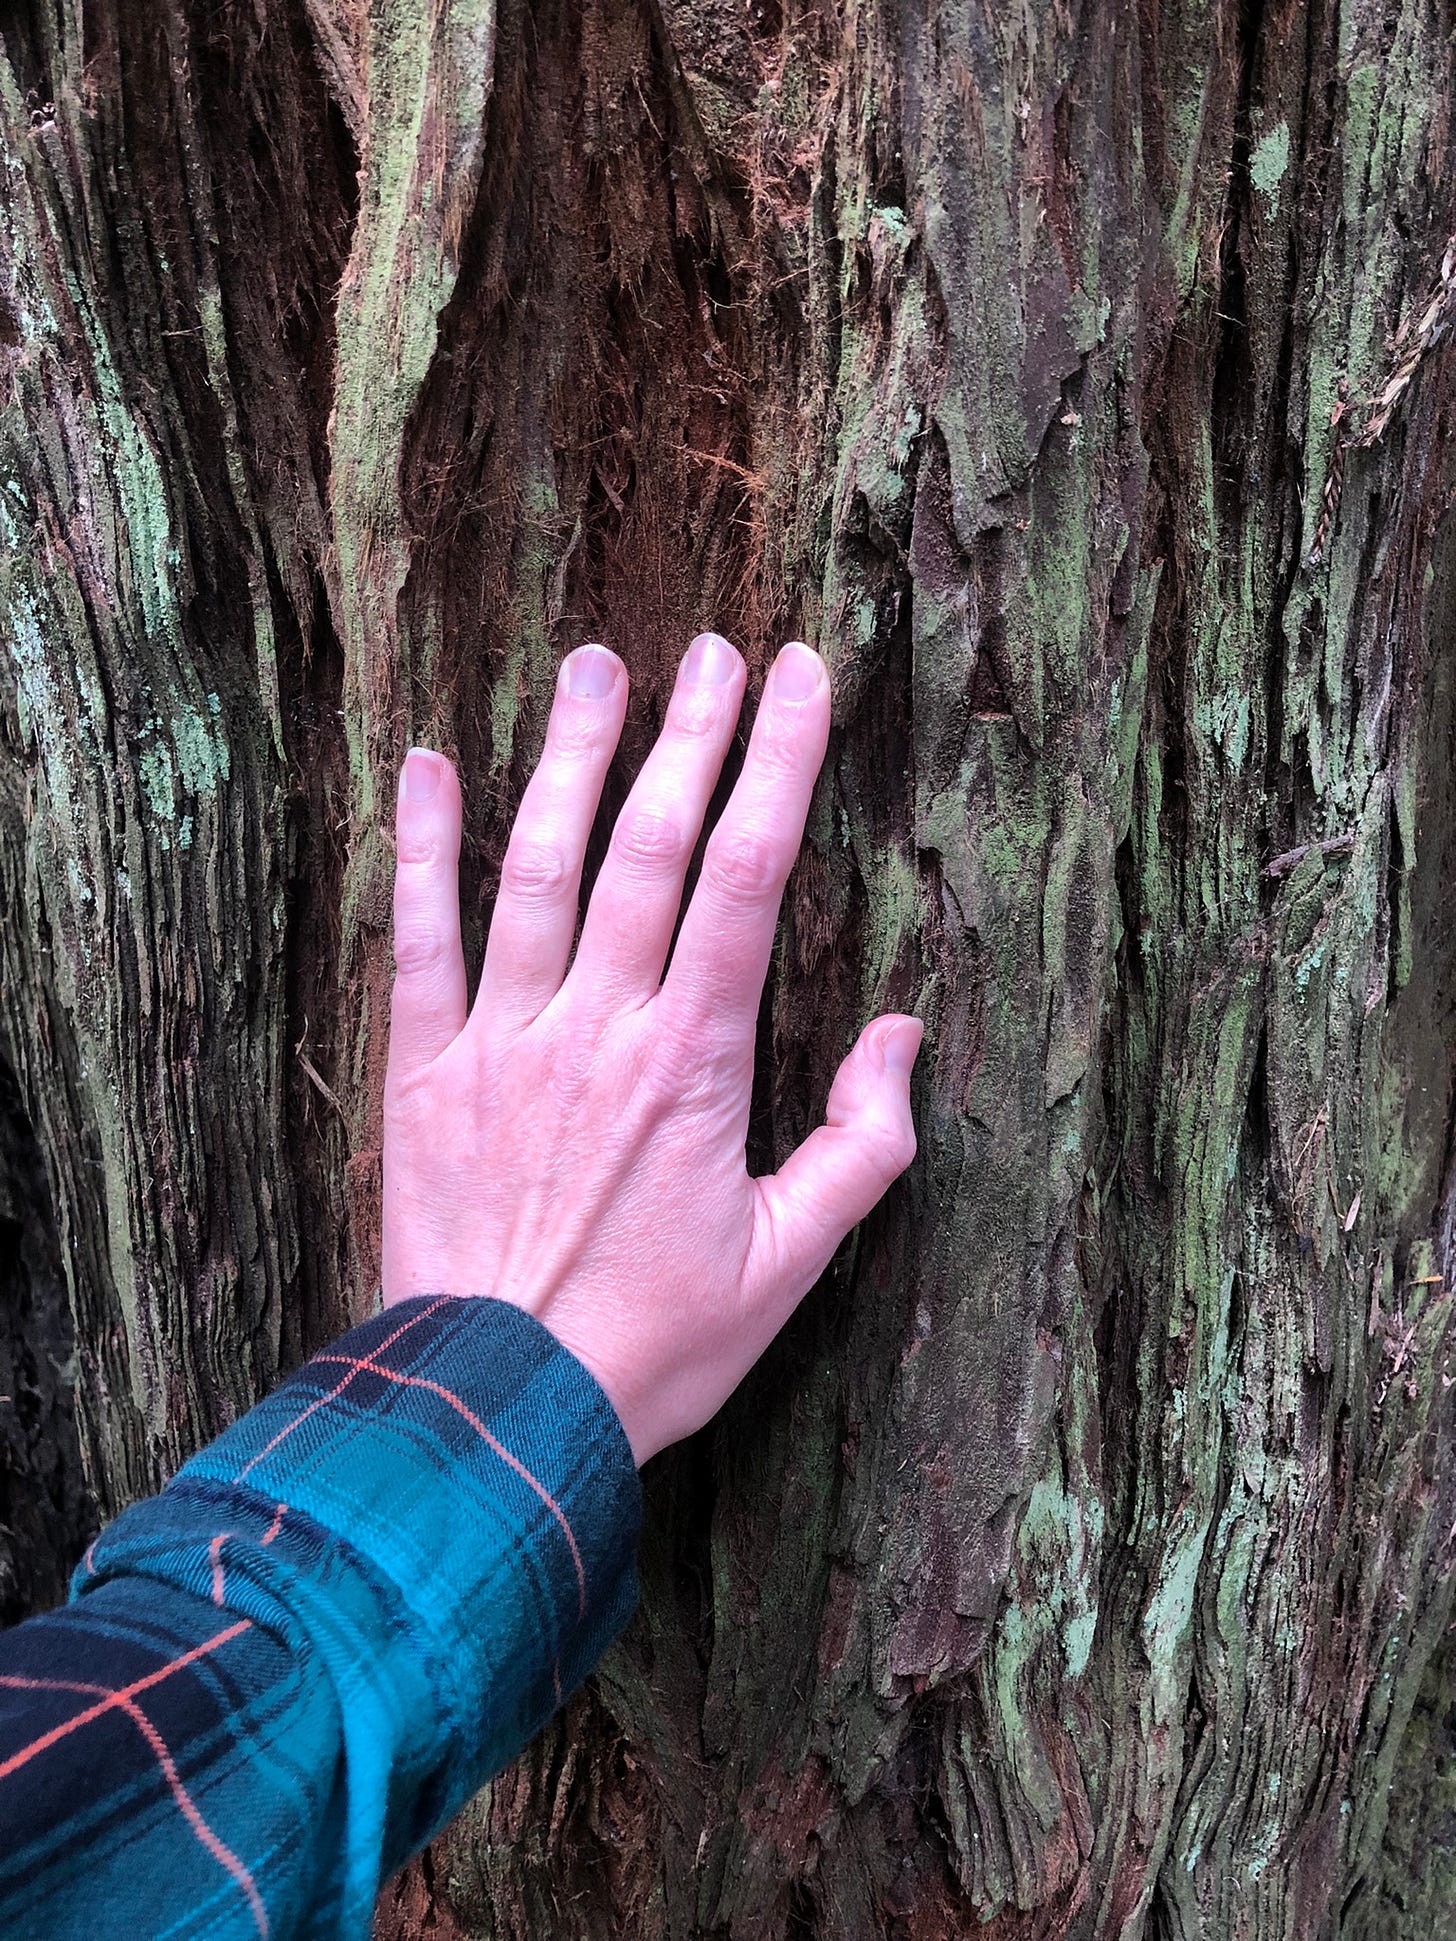 the brown and green bark of a redwood tree up close with a plaid-clothed left arm reaching toward it, whole hand against the bark in reverence